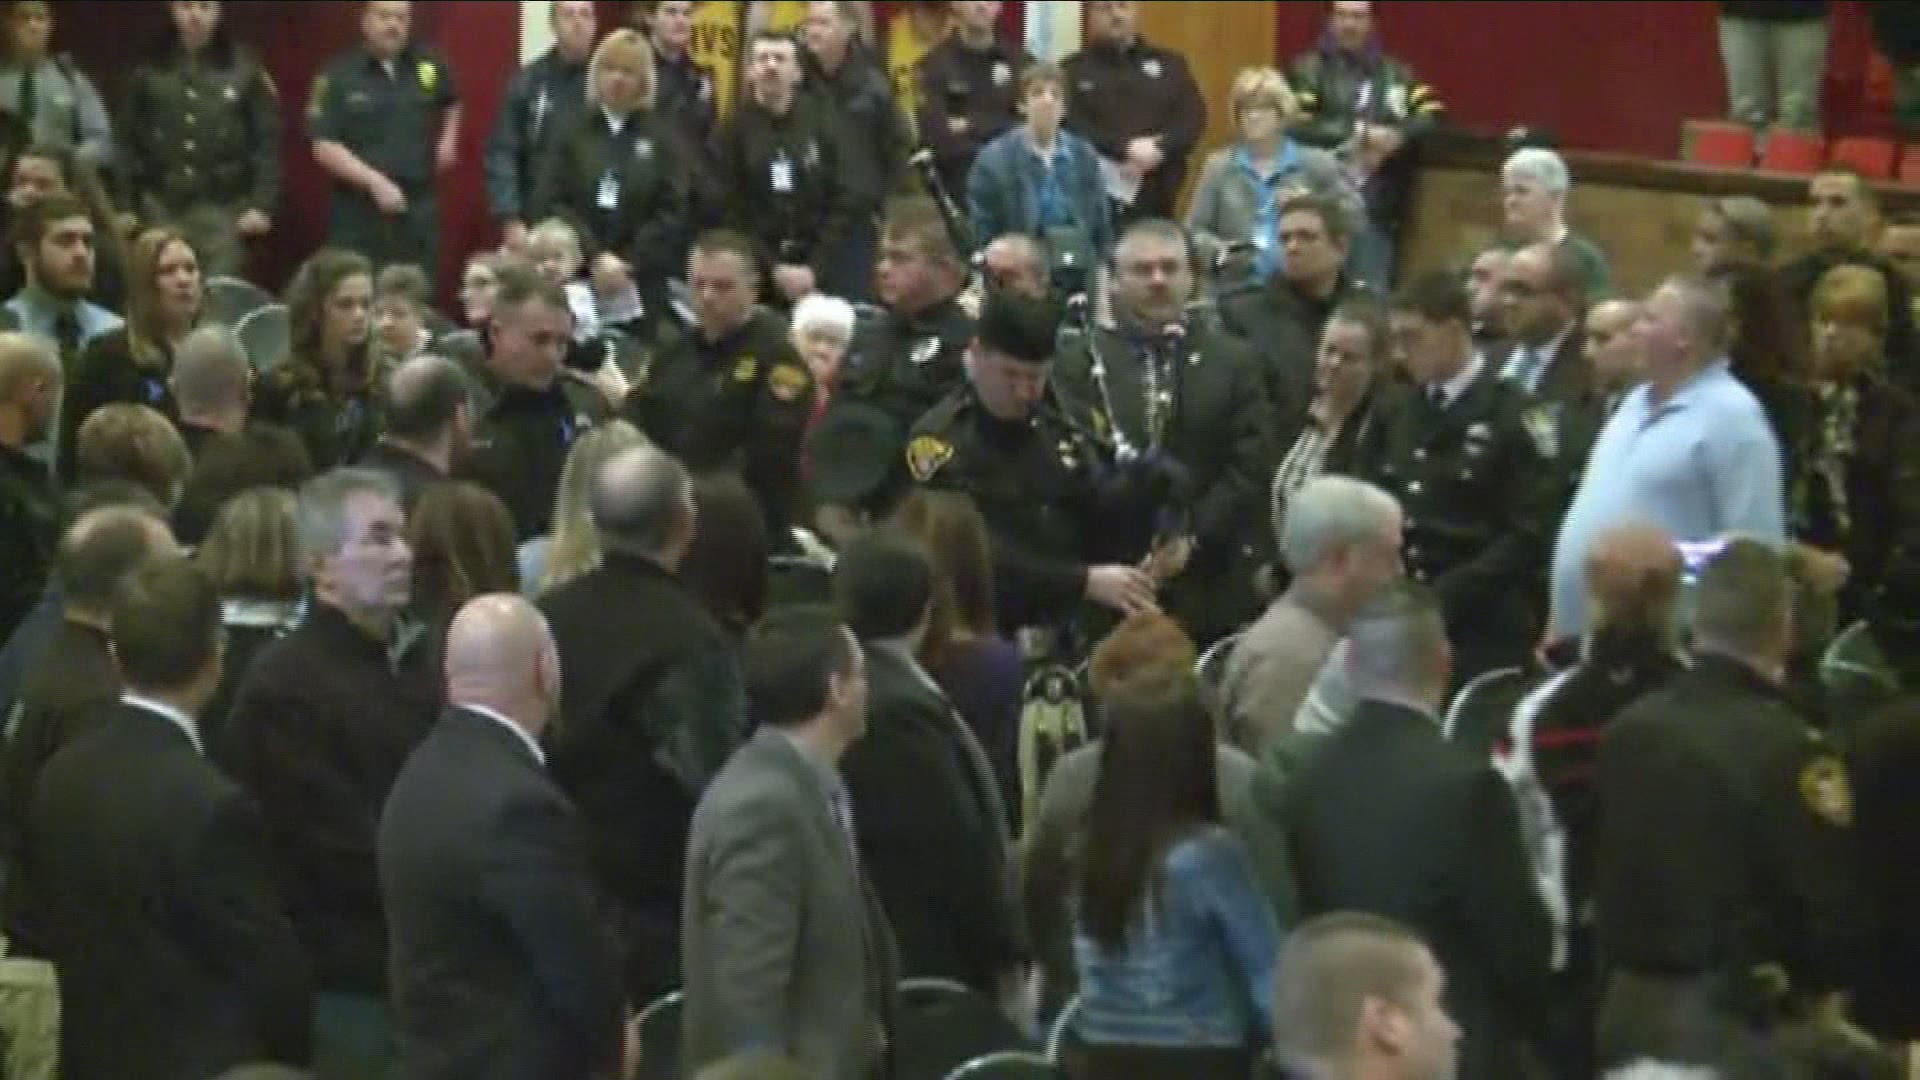 The memorial service for Canton Police K-9 Jethro took place Thursday. If you missed it, watch an excerpt.